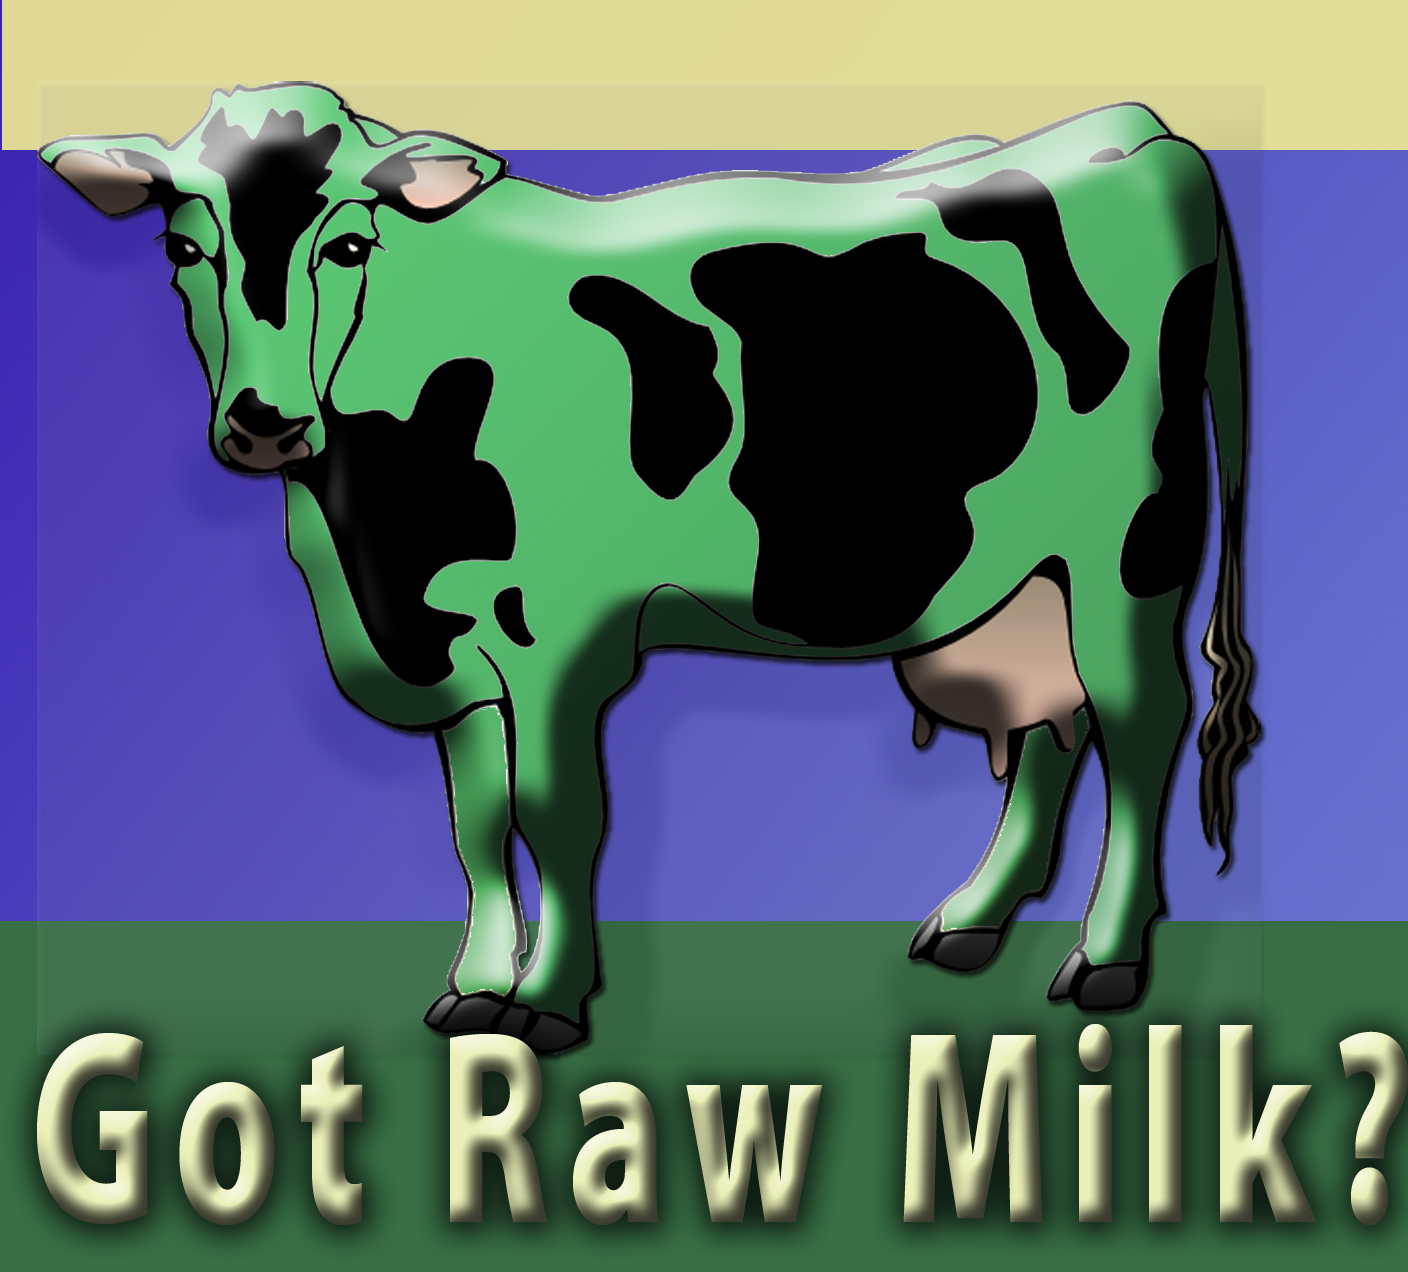 Food Chain Radio Michael Olson hosts Joann S. Grohman, Author of Keeping a Family Cow – HAVE A (GREEN) COW!